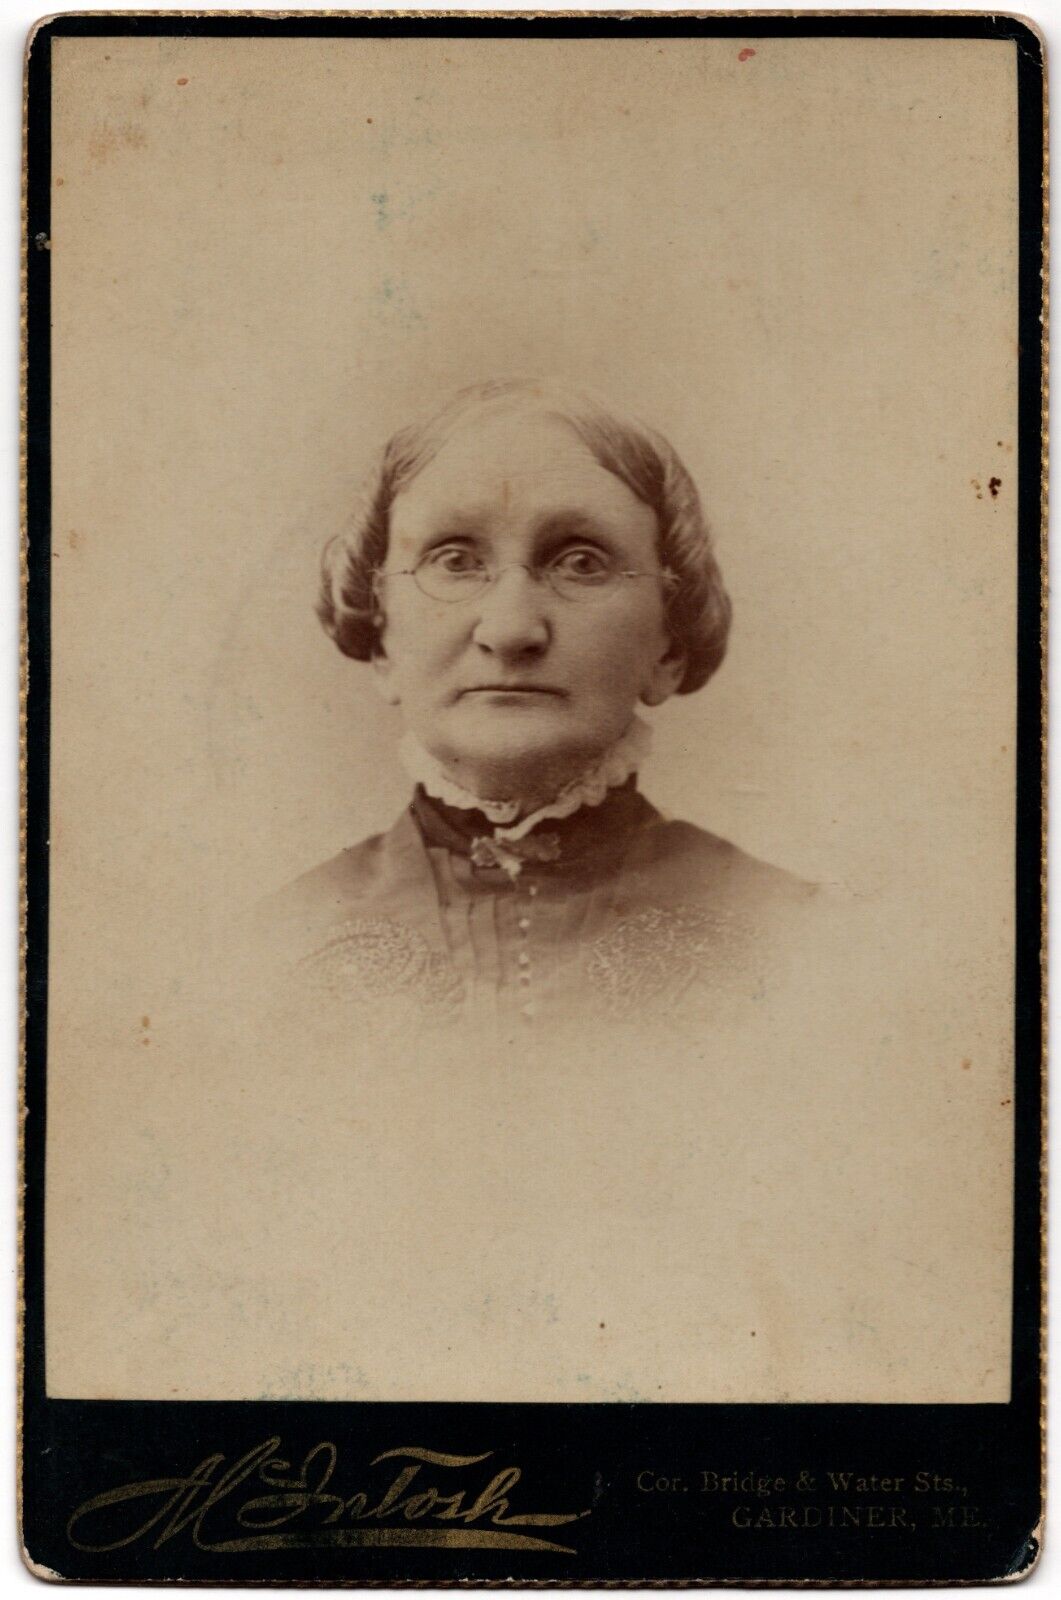 C. 1880s CABINET CARD McINTOSH OLD LADY IN DRESS WEARING GLASSES GARDINER MAINE